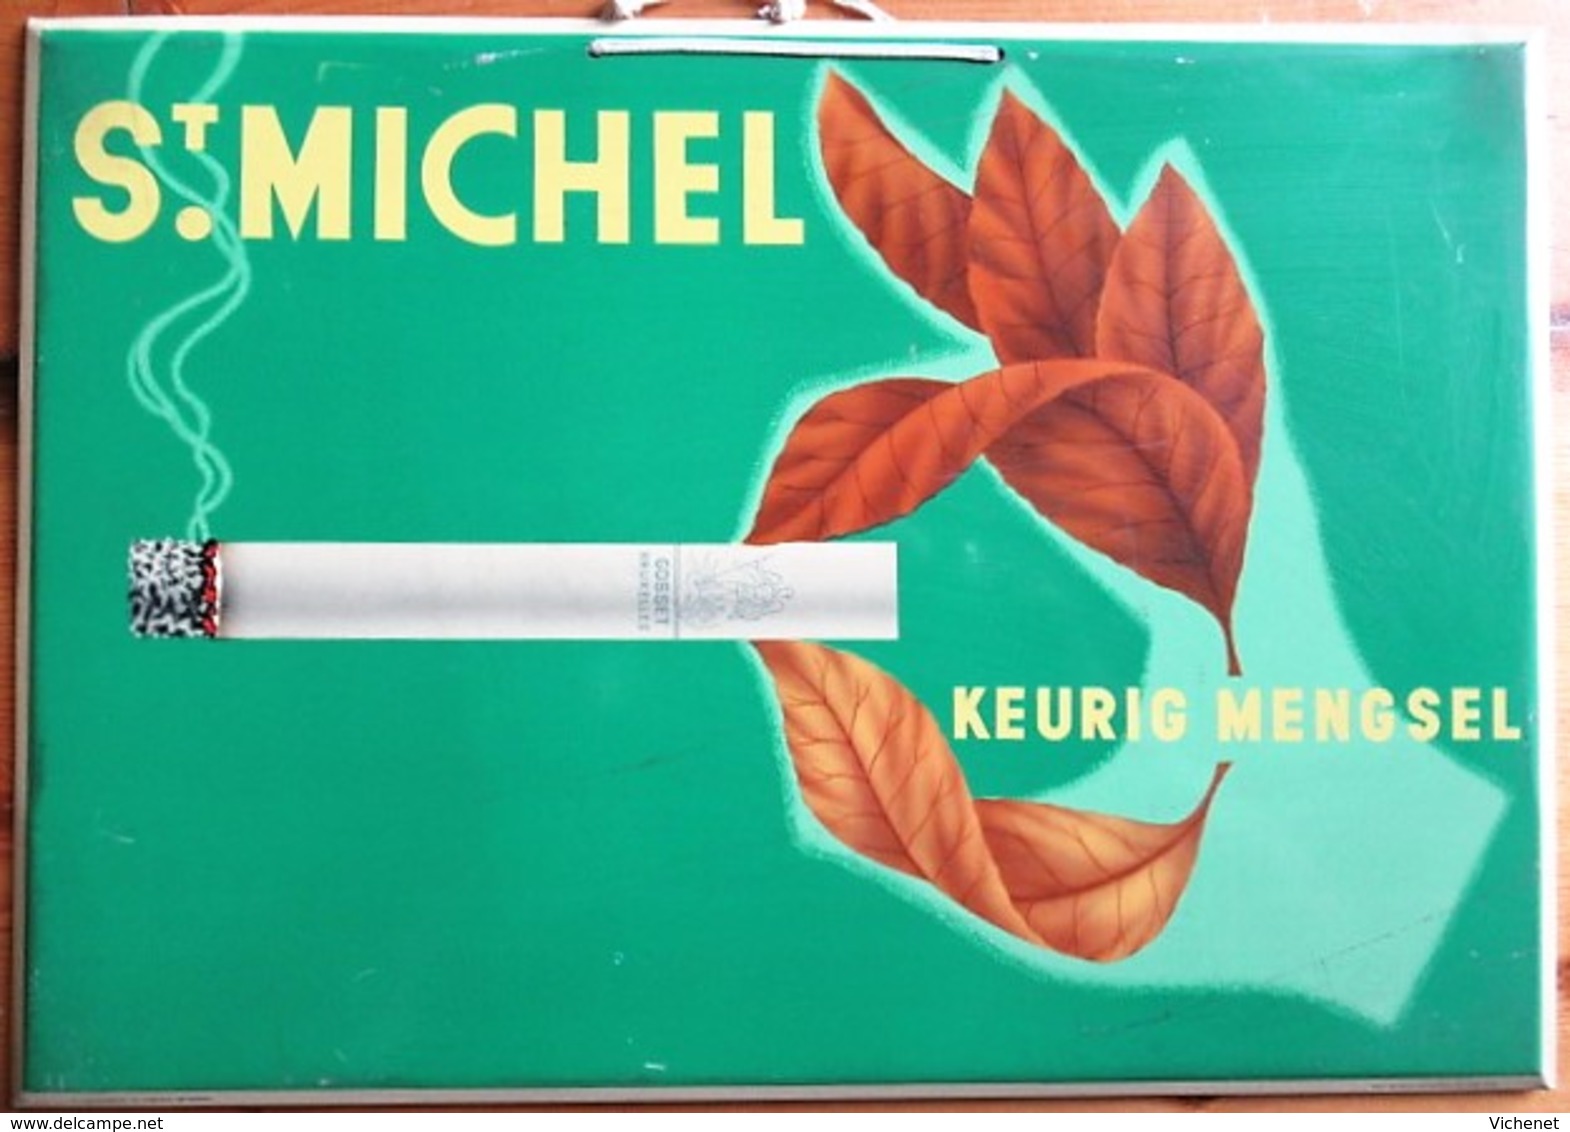 St. Michel (Cigarettes) - Metal Showcard On Rigid Cardboard To Hang - 340 X 240 Mm - Objets Publicitaires